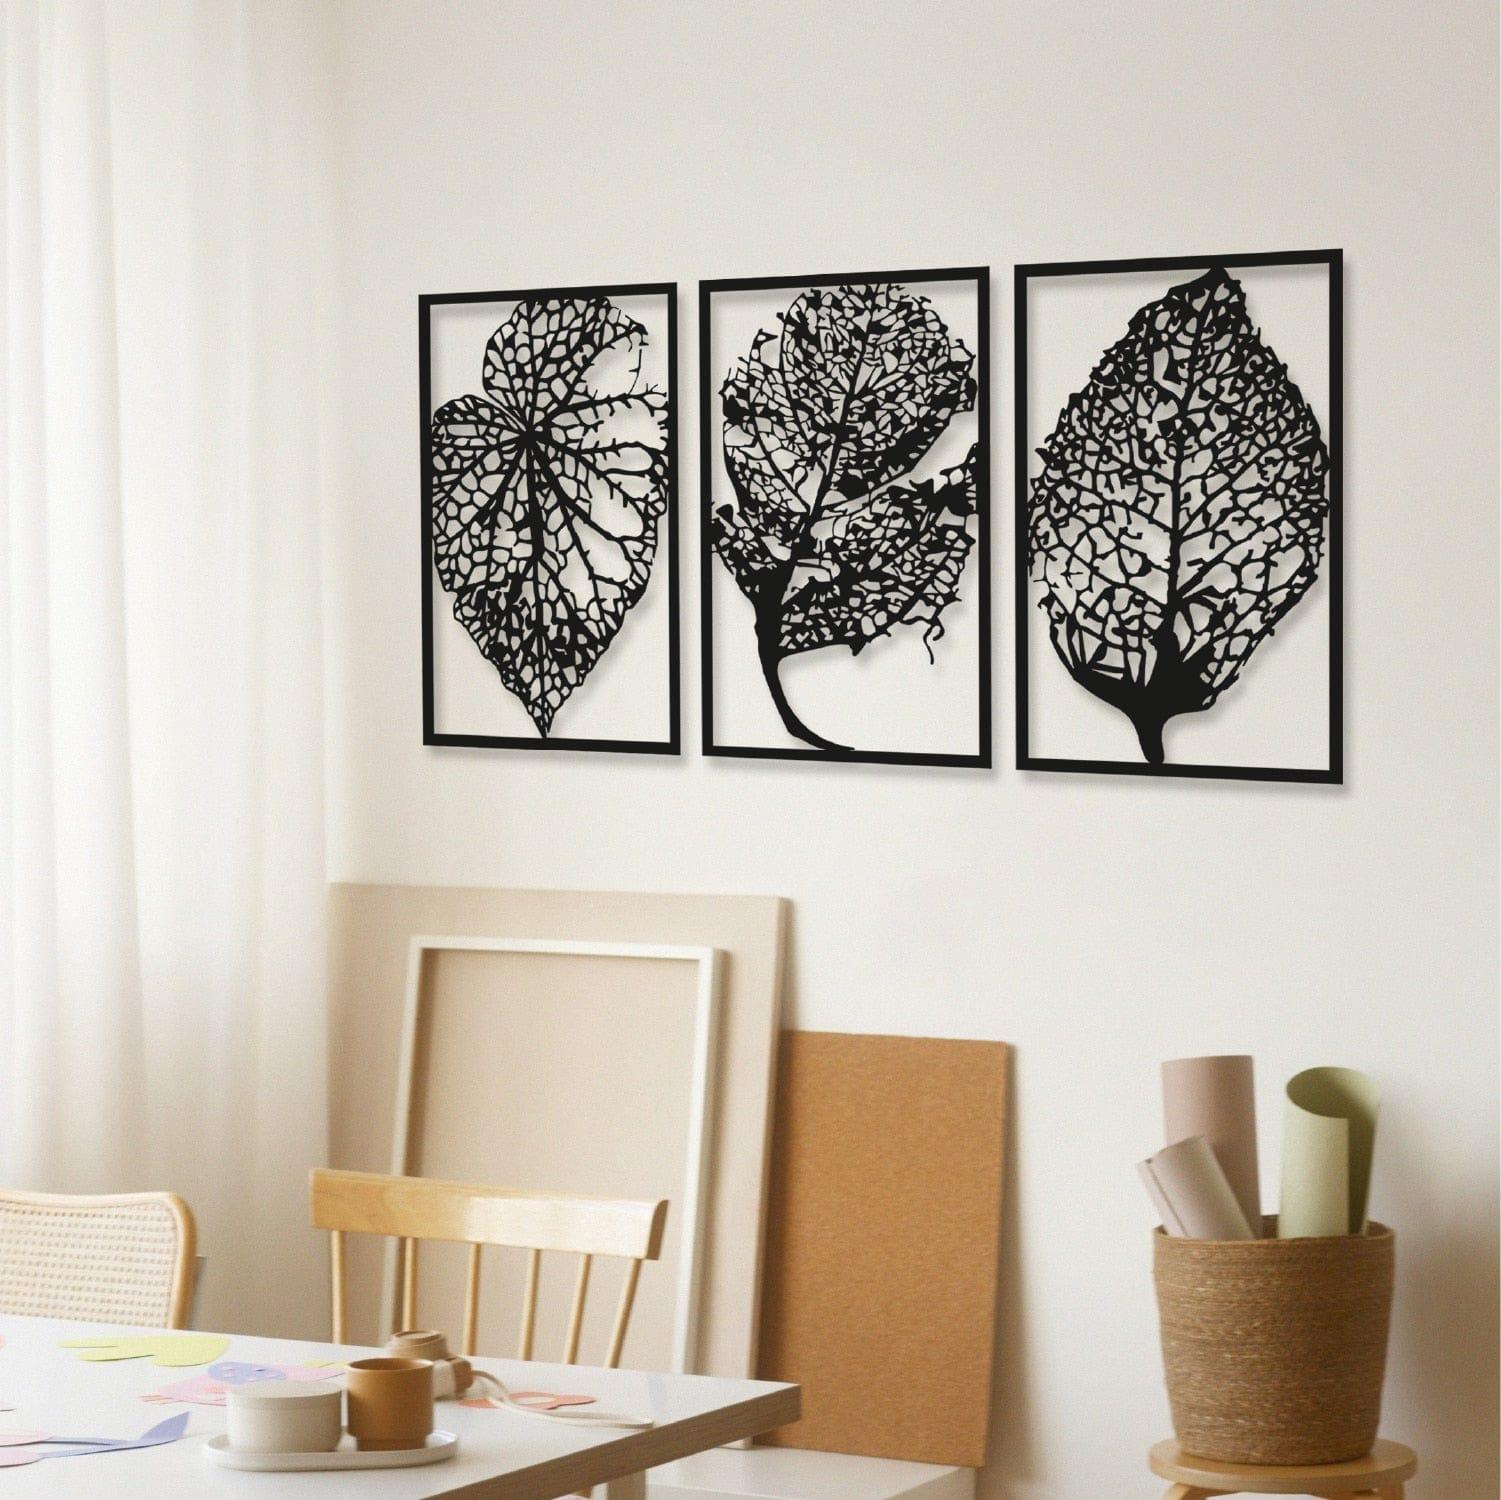 Shop 0 Wooden Wall Table Quality Black Color 3 Pieces Dried Leaf Luxury Home Living Room Bedroom Design New 3D Gift Mademoiselle Home Decor